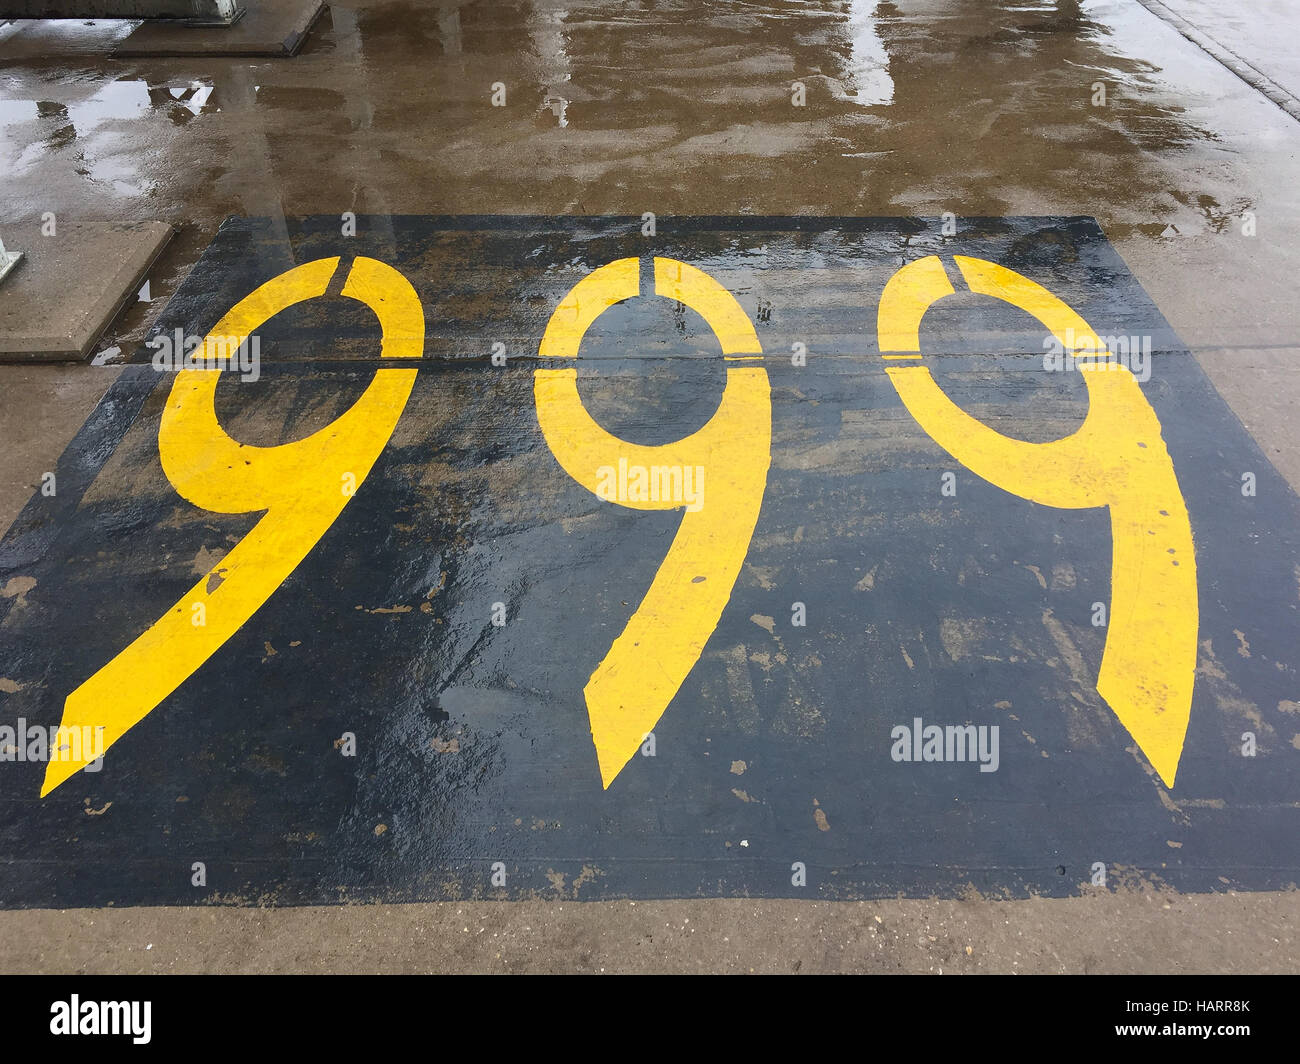 999 sign painted on the tarmac at East Midlands Airport in the airport fire and rescue service training area Stock Photo